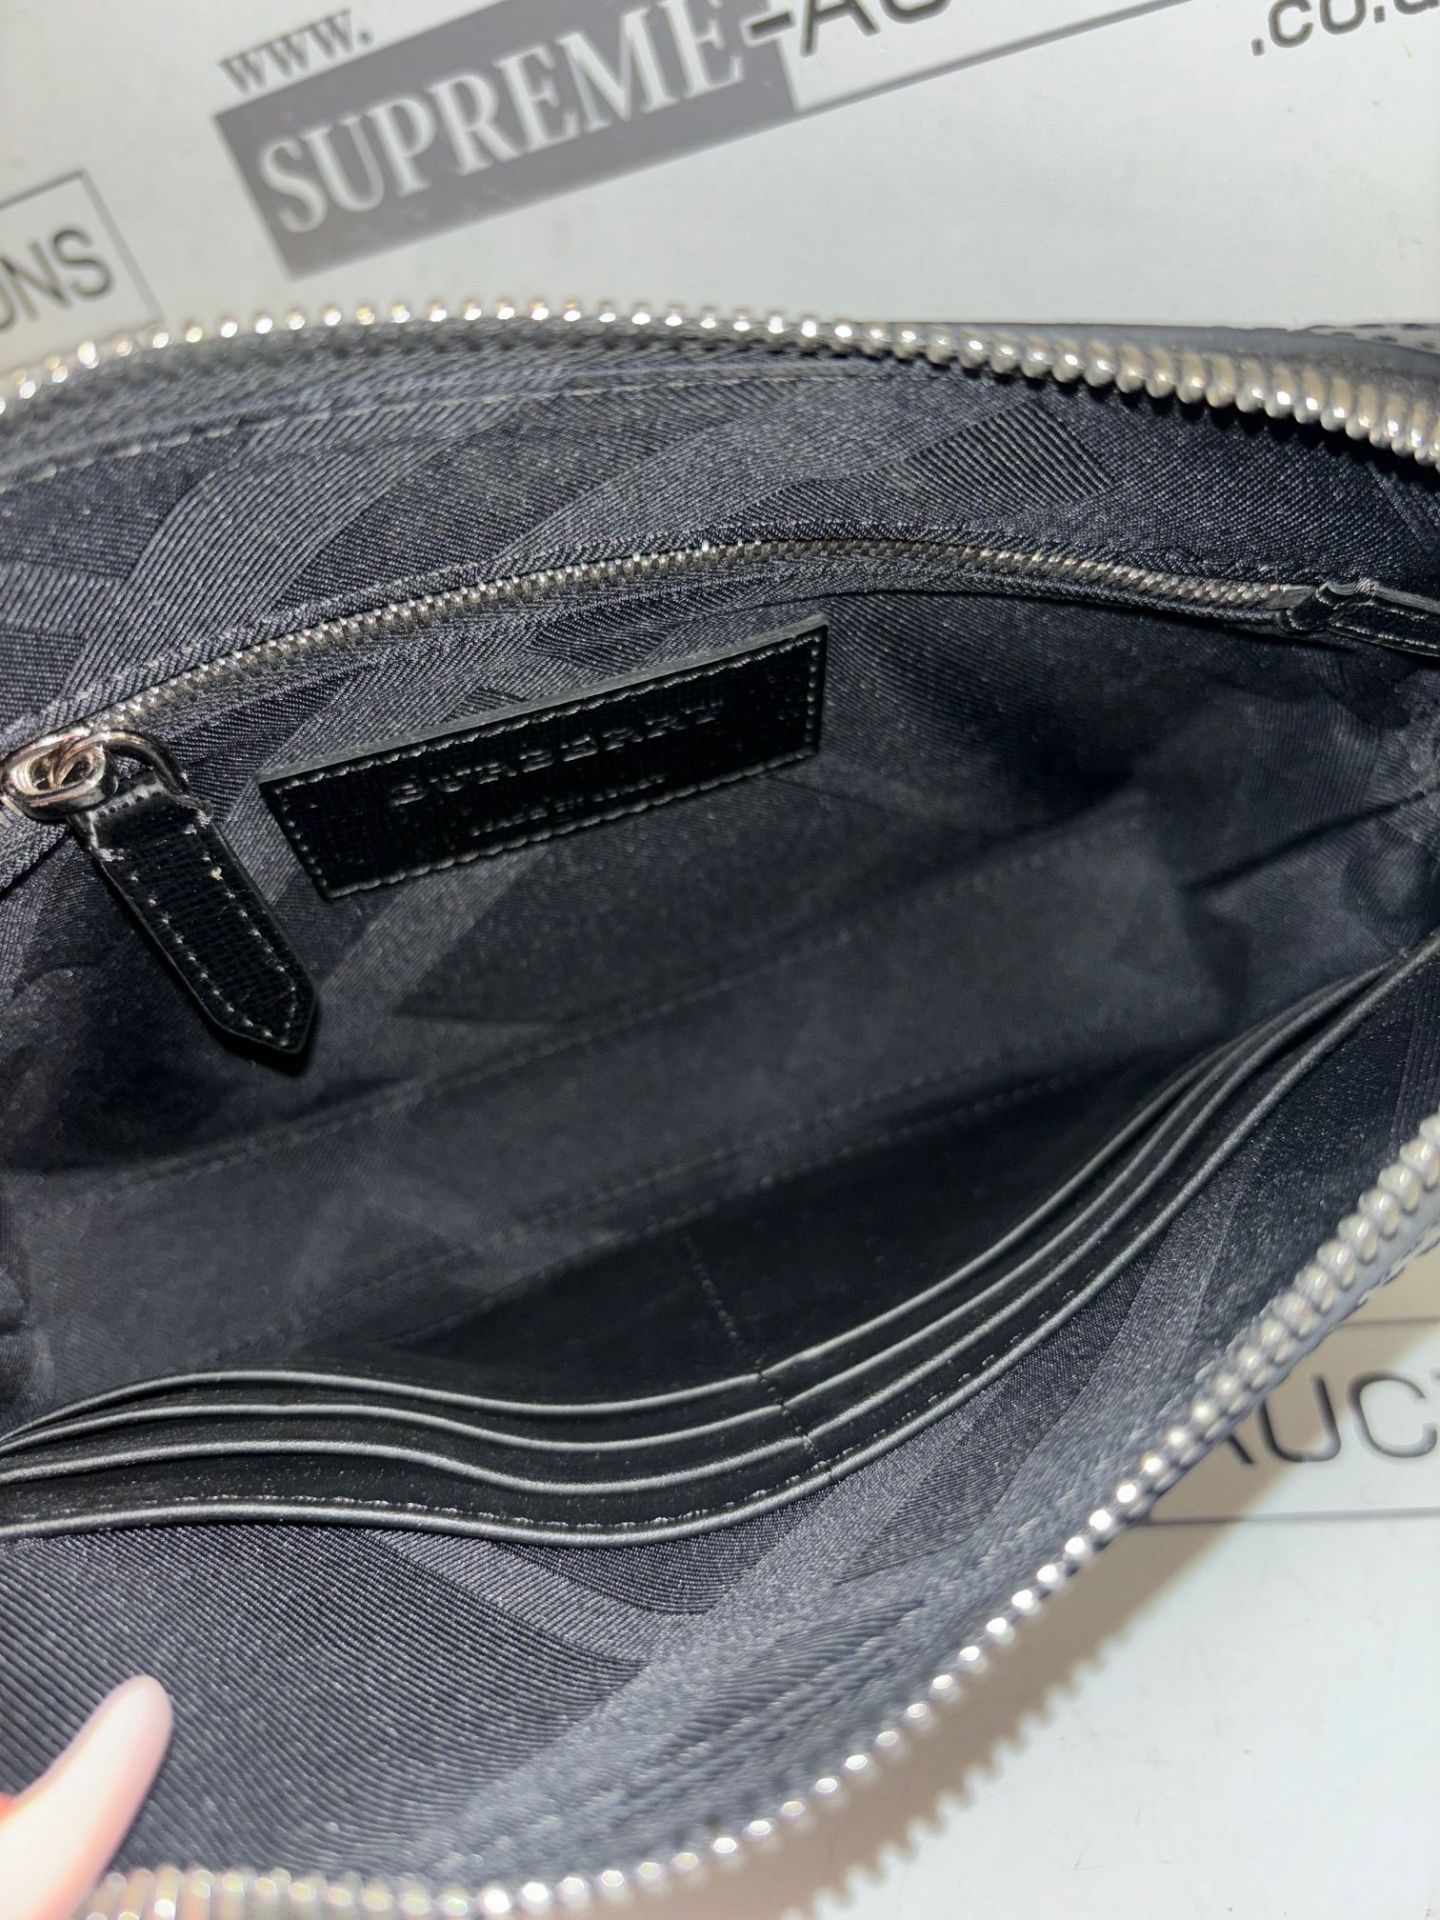 Genuine Burberry Saffiano Leather Clutch Bag In Black. RRP £885.00. - Image 4 of 5